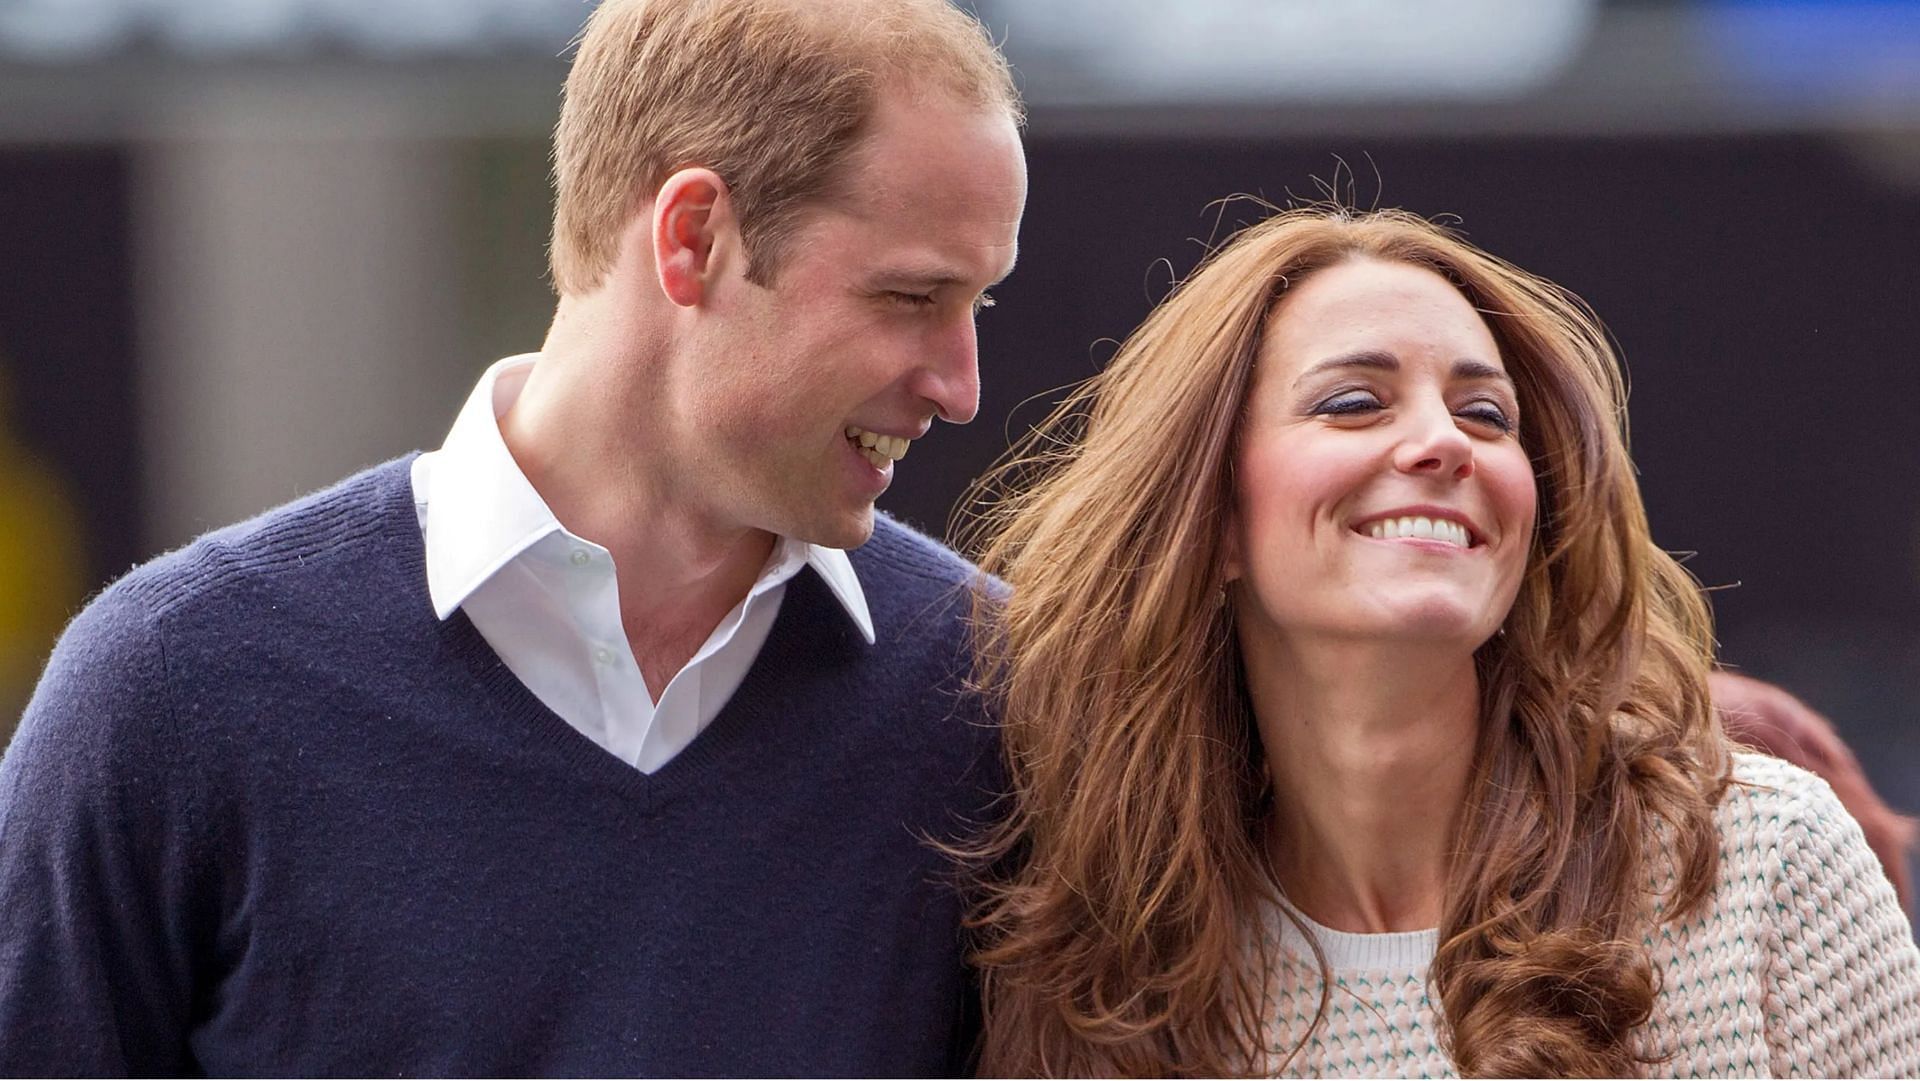 Prince William and Kate Middleton met in 2001. (Image via David Rowland/Getty Images)